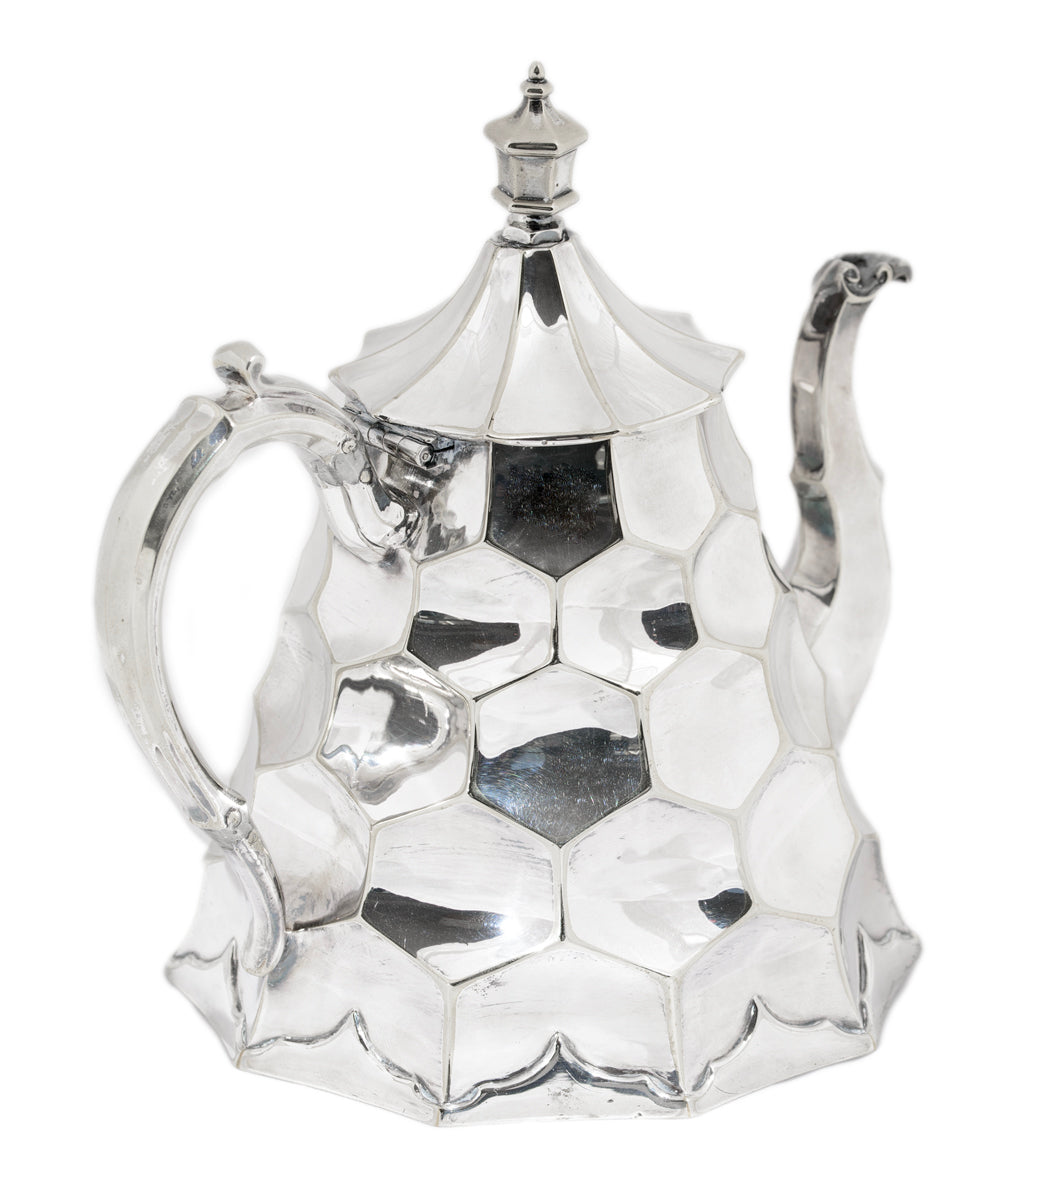 Antique Victorian Unusual Hexagon Honeycomb Silver Plated Teapot c.1890(A1515)